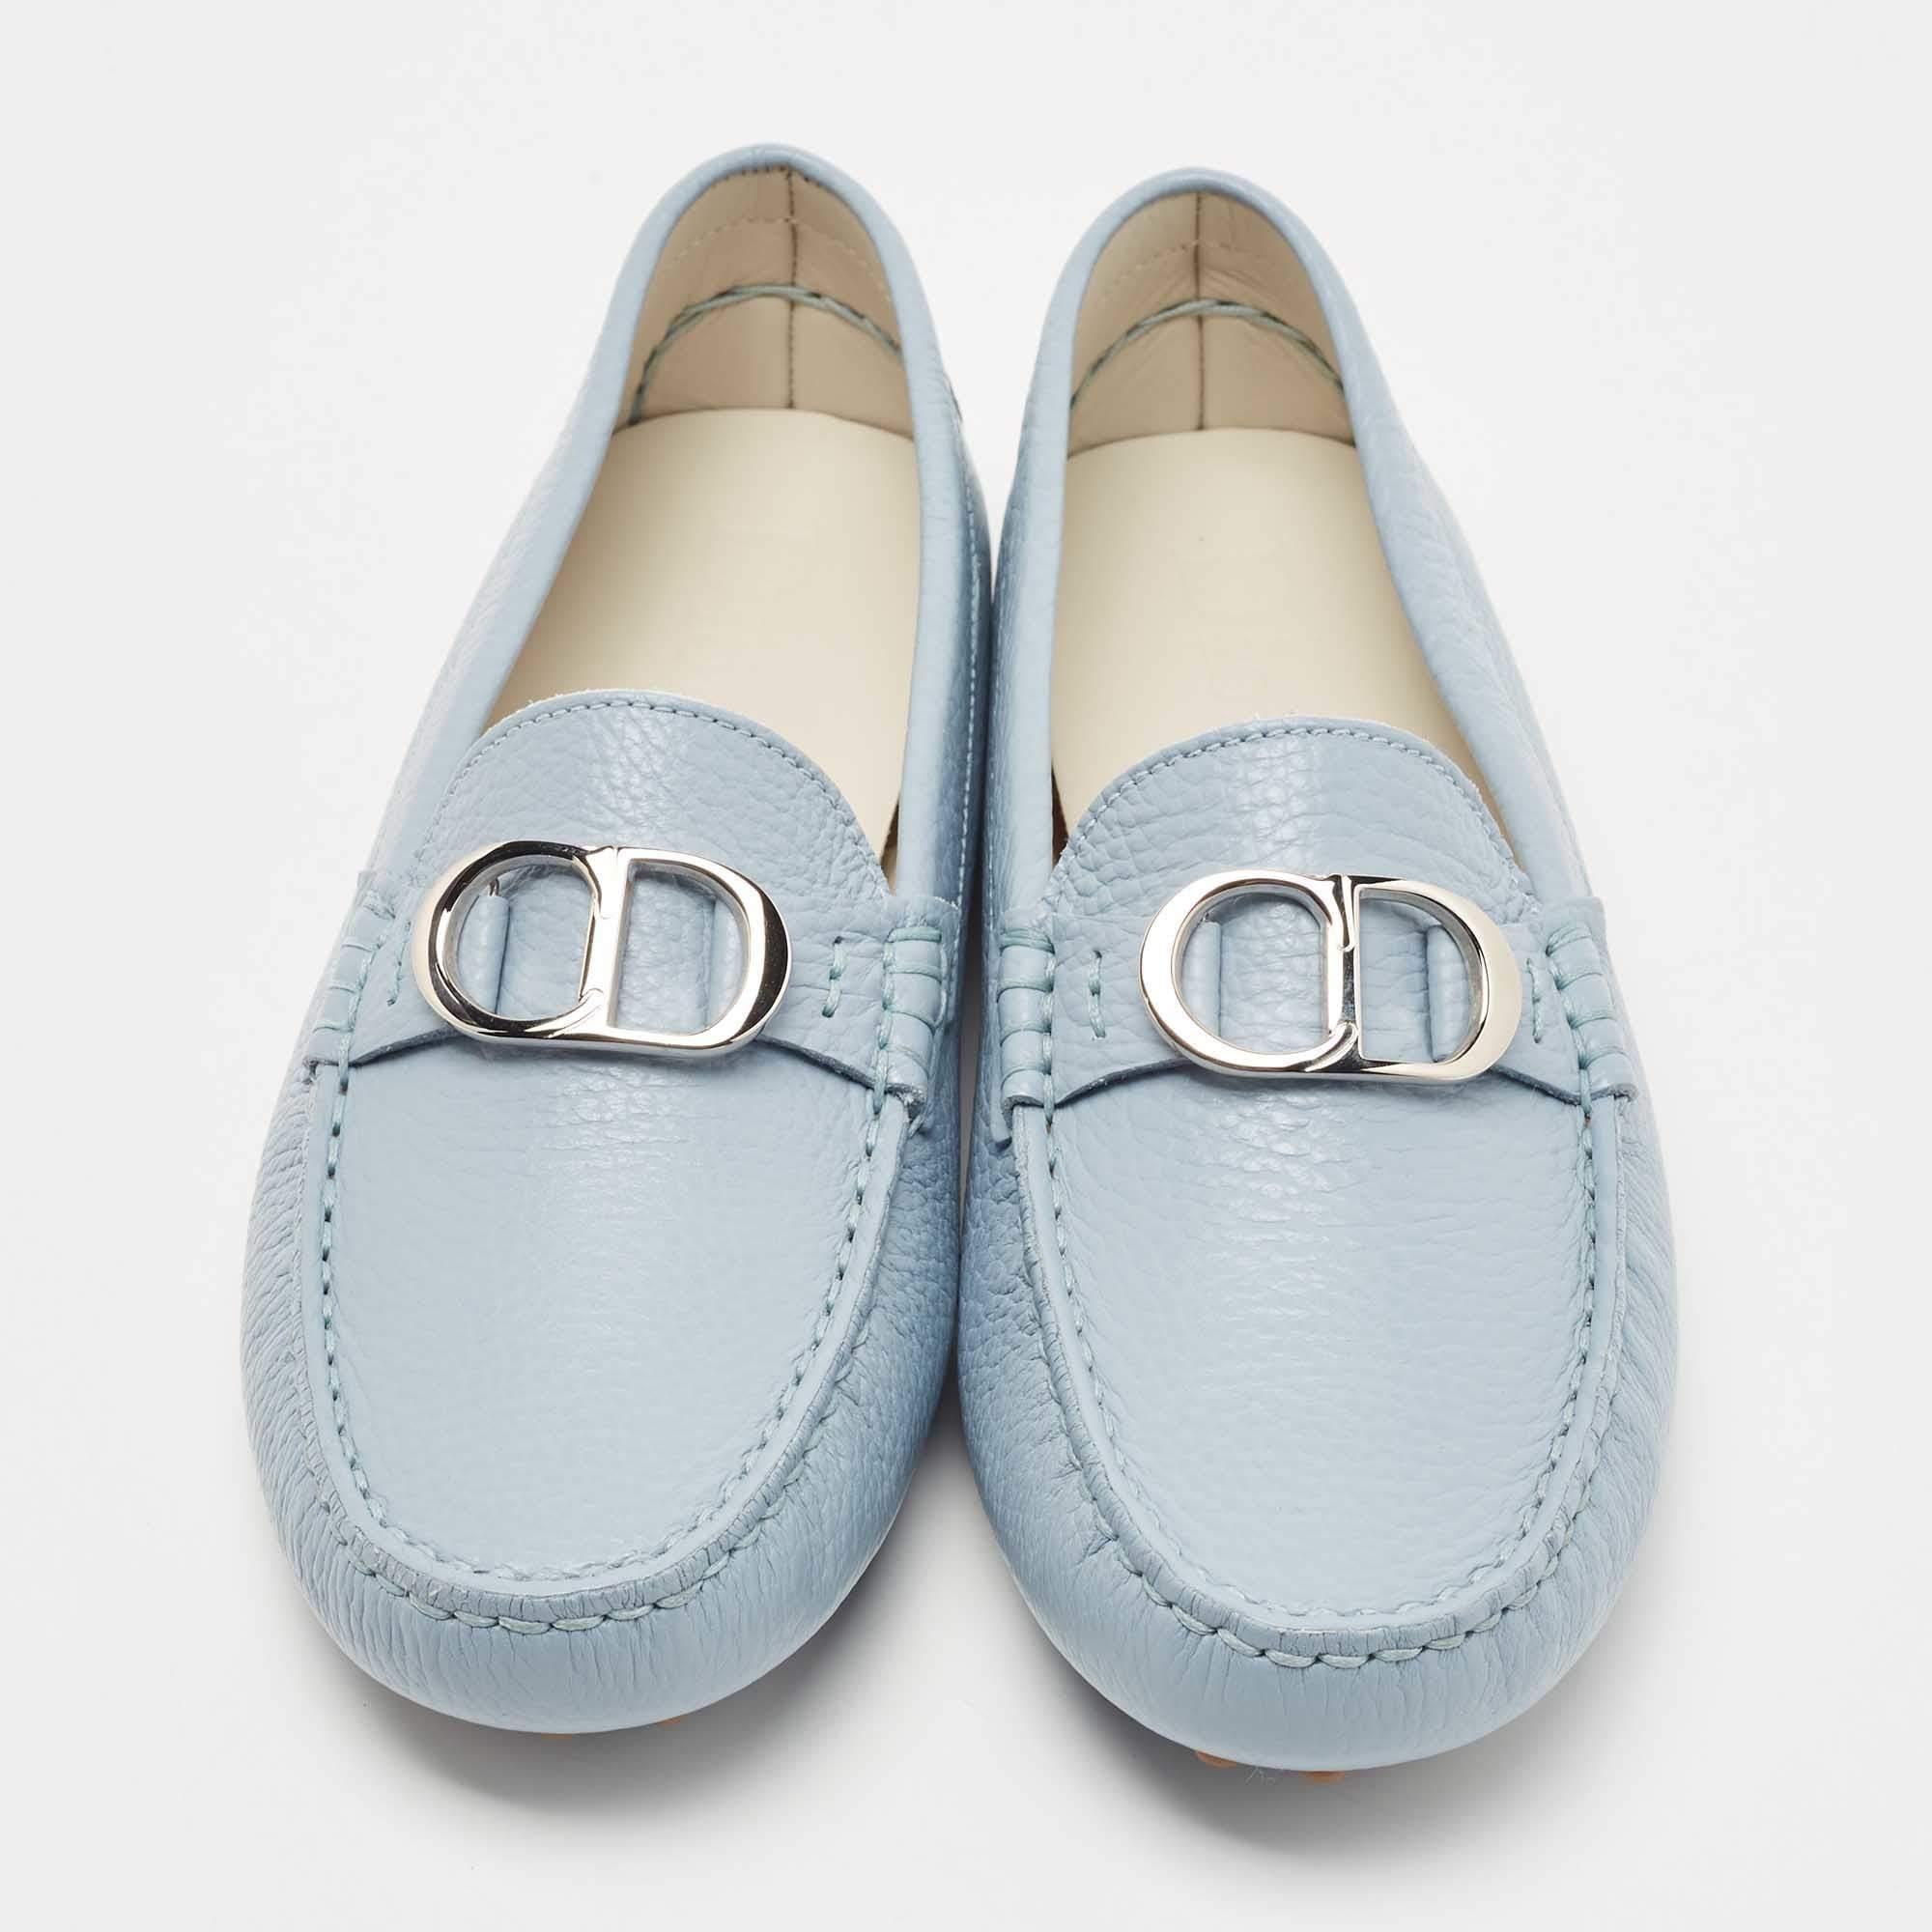 Practical, fashionable, and durable—these designer loafers are carefully built to be fine companions to your everyday style. They come made using the best materials to be a prized buy.

Includes: Original Box, Original Dustbag
